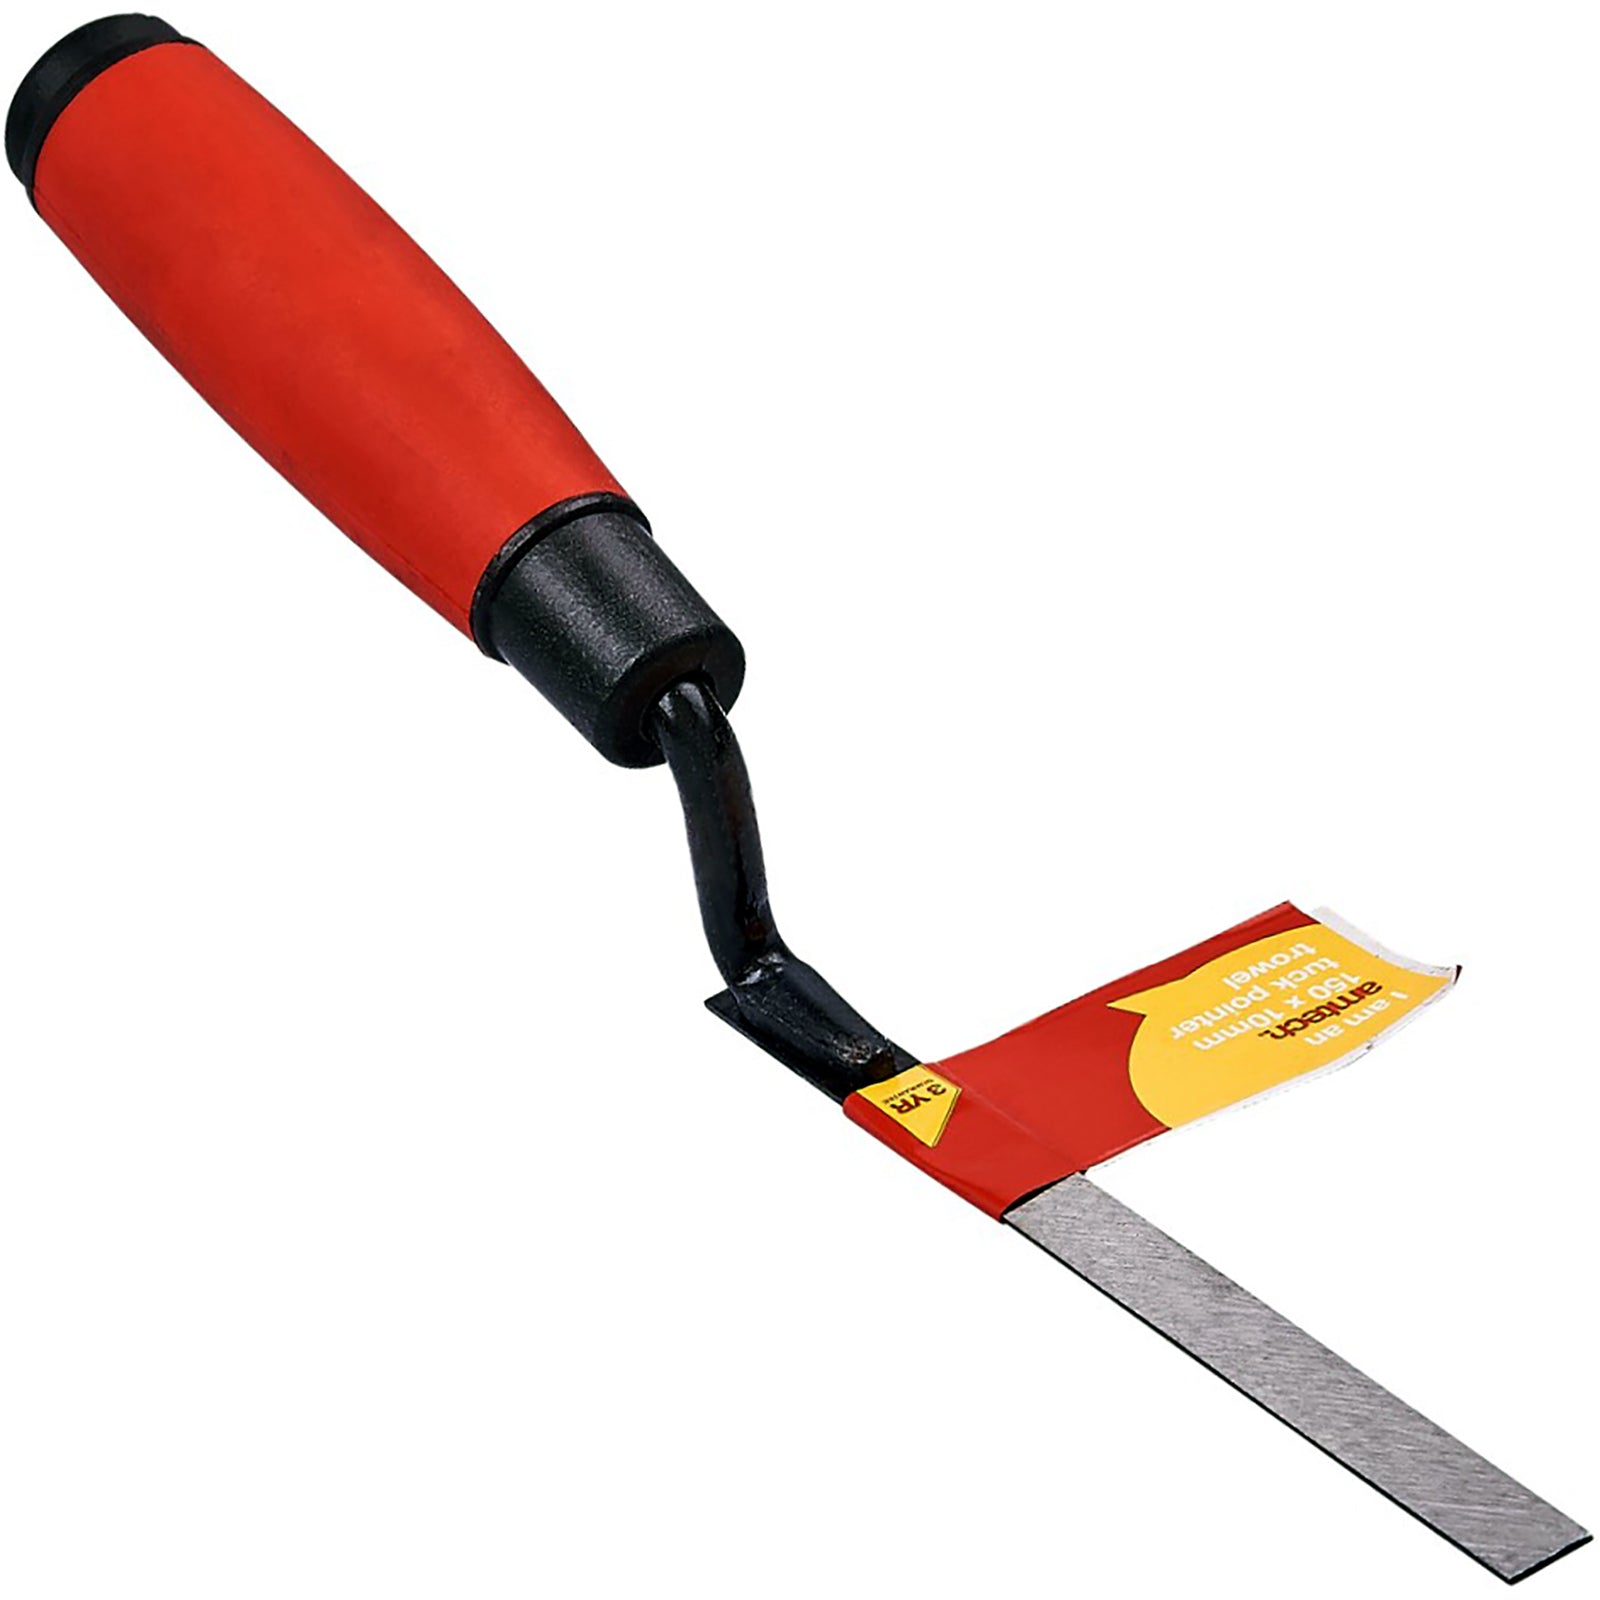 Amtech 150 x 10mm Tuck Pointer Trowel with Soft Grip Handle